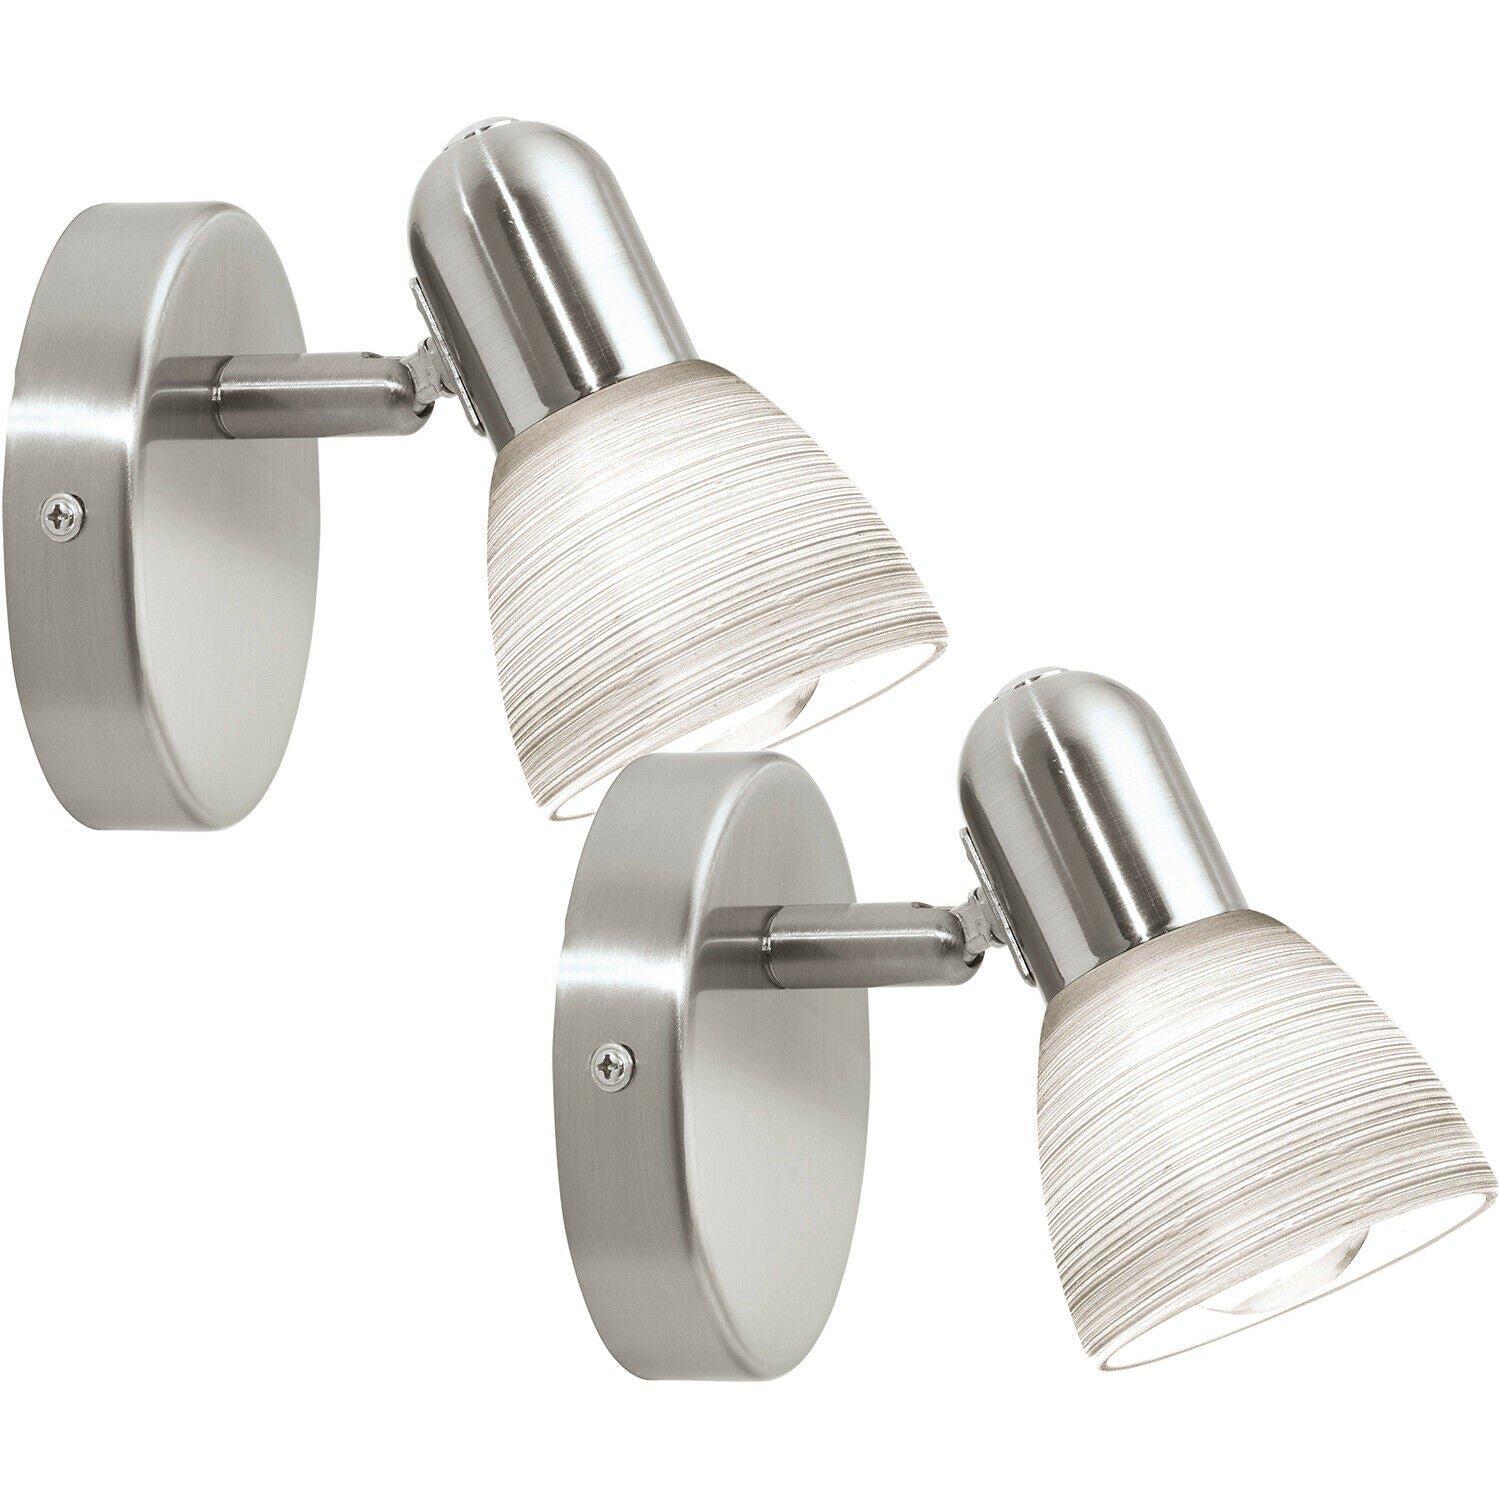 2 PACK Wall Light Colour Satin Nickel Shade White Glass Wiping Technique E14 25W